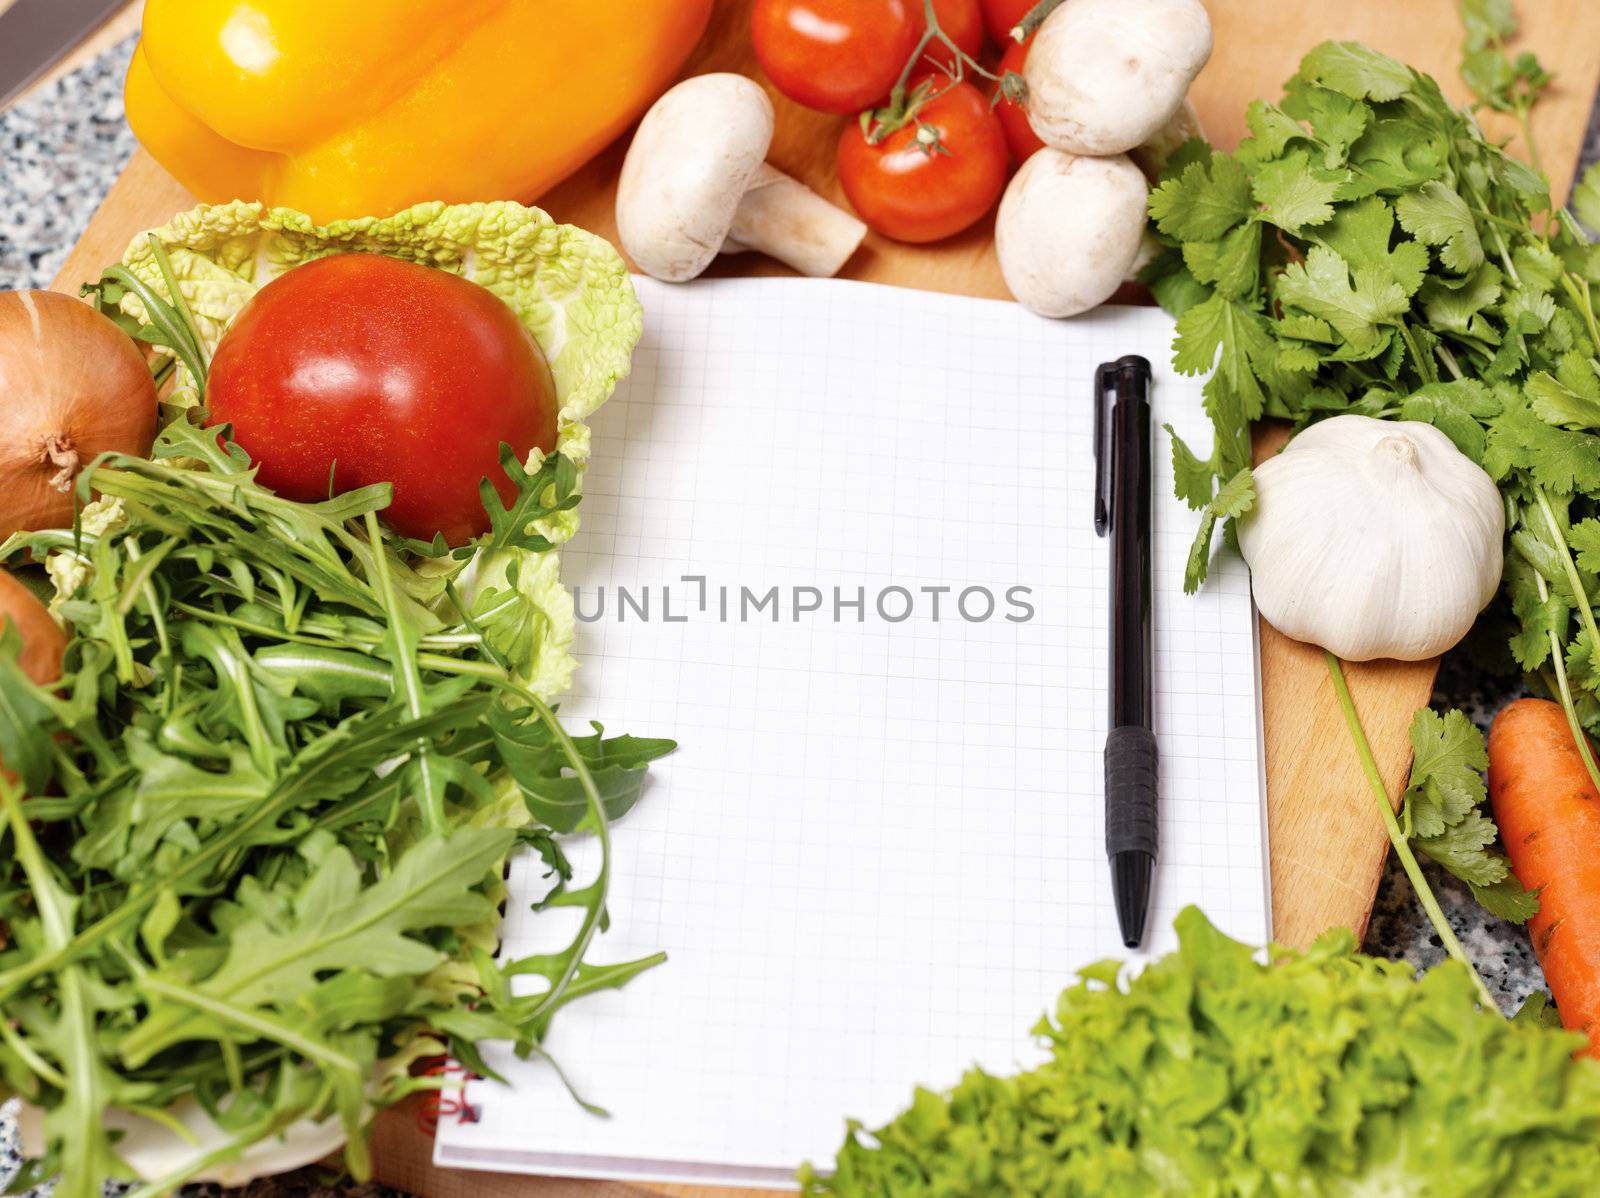 Note book among the vegetables for writing recipe